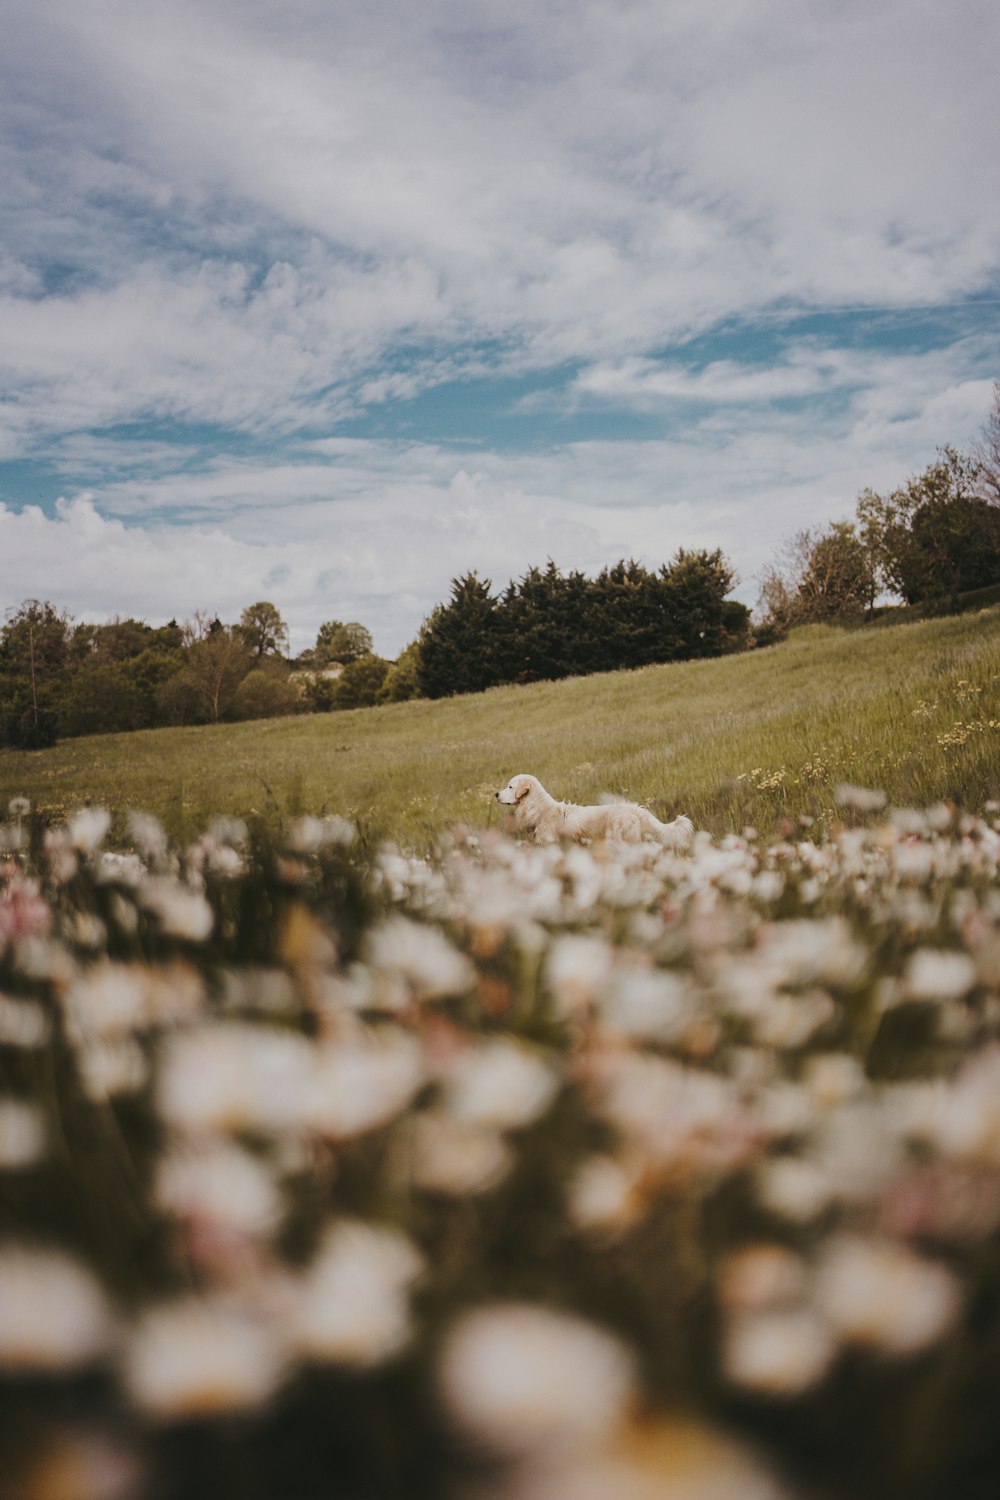 a field full of white flowers under a cloudy sky